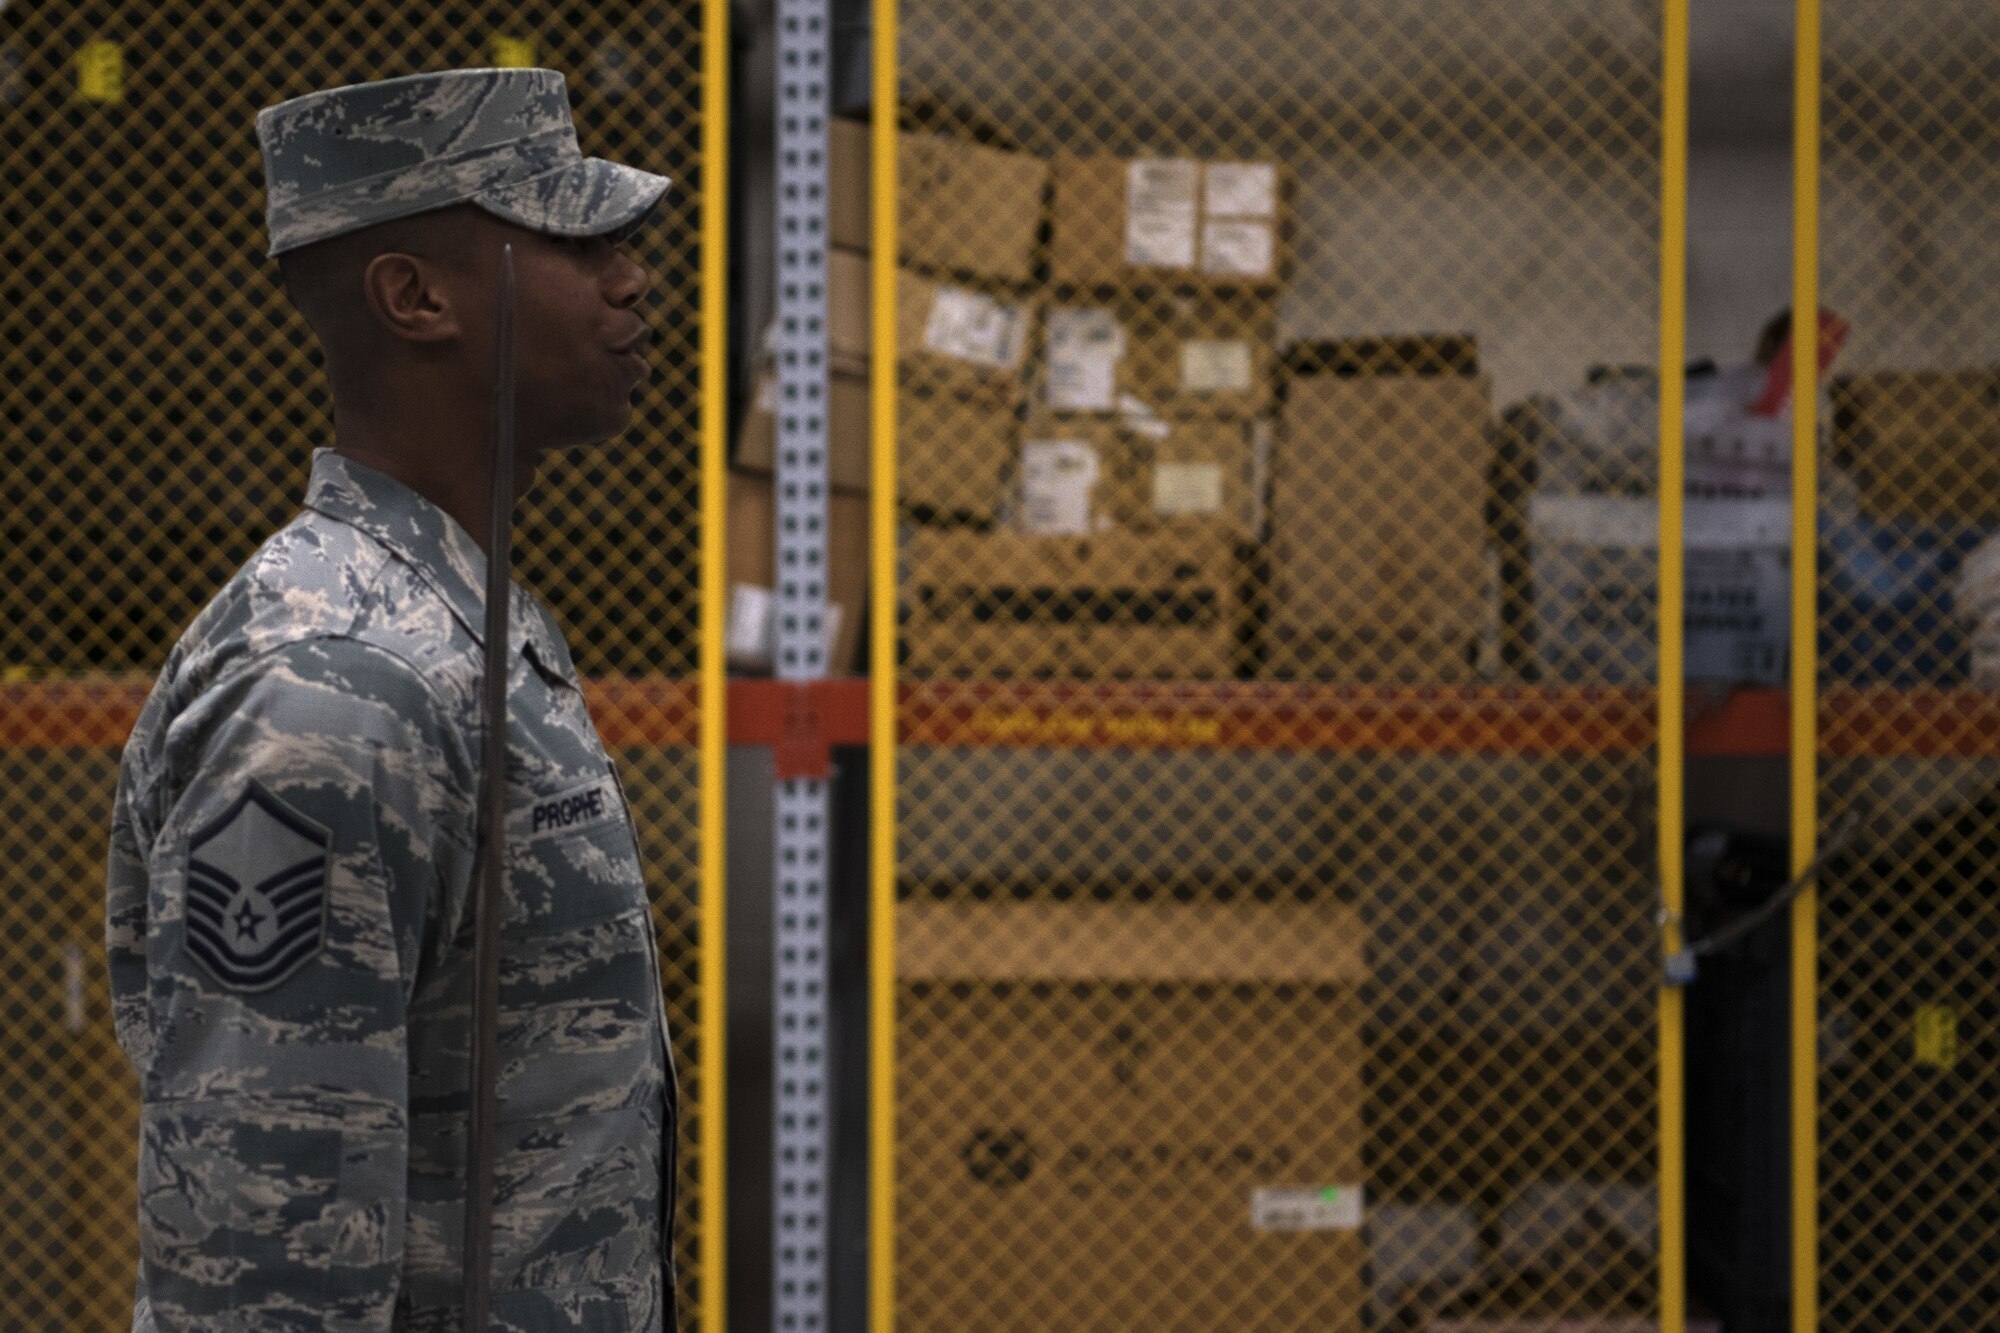 U.S. Air Force Master Sgt. Jason Prophet, Air Force Honor Guard Drill Team superintendent, gives a command during drill team practice inside the Roberts Consolidated Aircraft Maintenance Facility at Keesler Air Force Base, Mississippi, Jan. 30, 2019. The Air Force Honor Guard spends five weeks at Keesler perfecting their routine they are going to use for the rest of the year. (U.S. Air Force photo by Airman 1st Class Suzie Plotnikov)